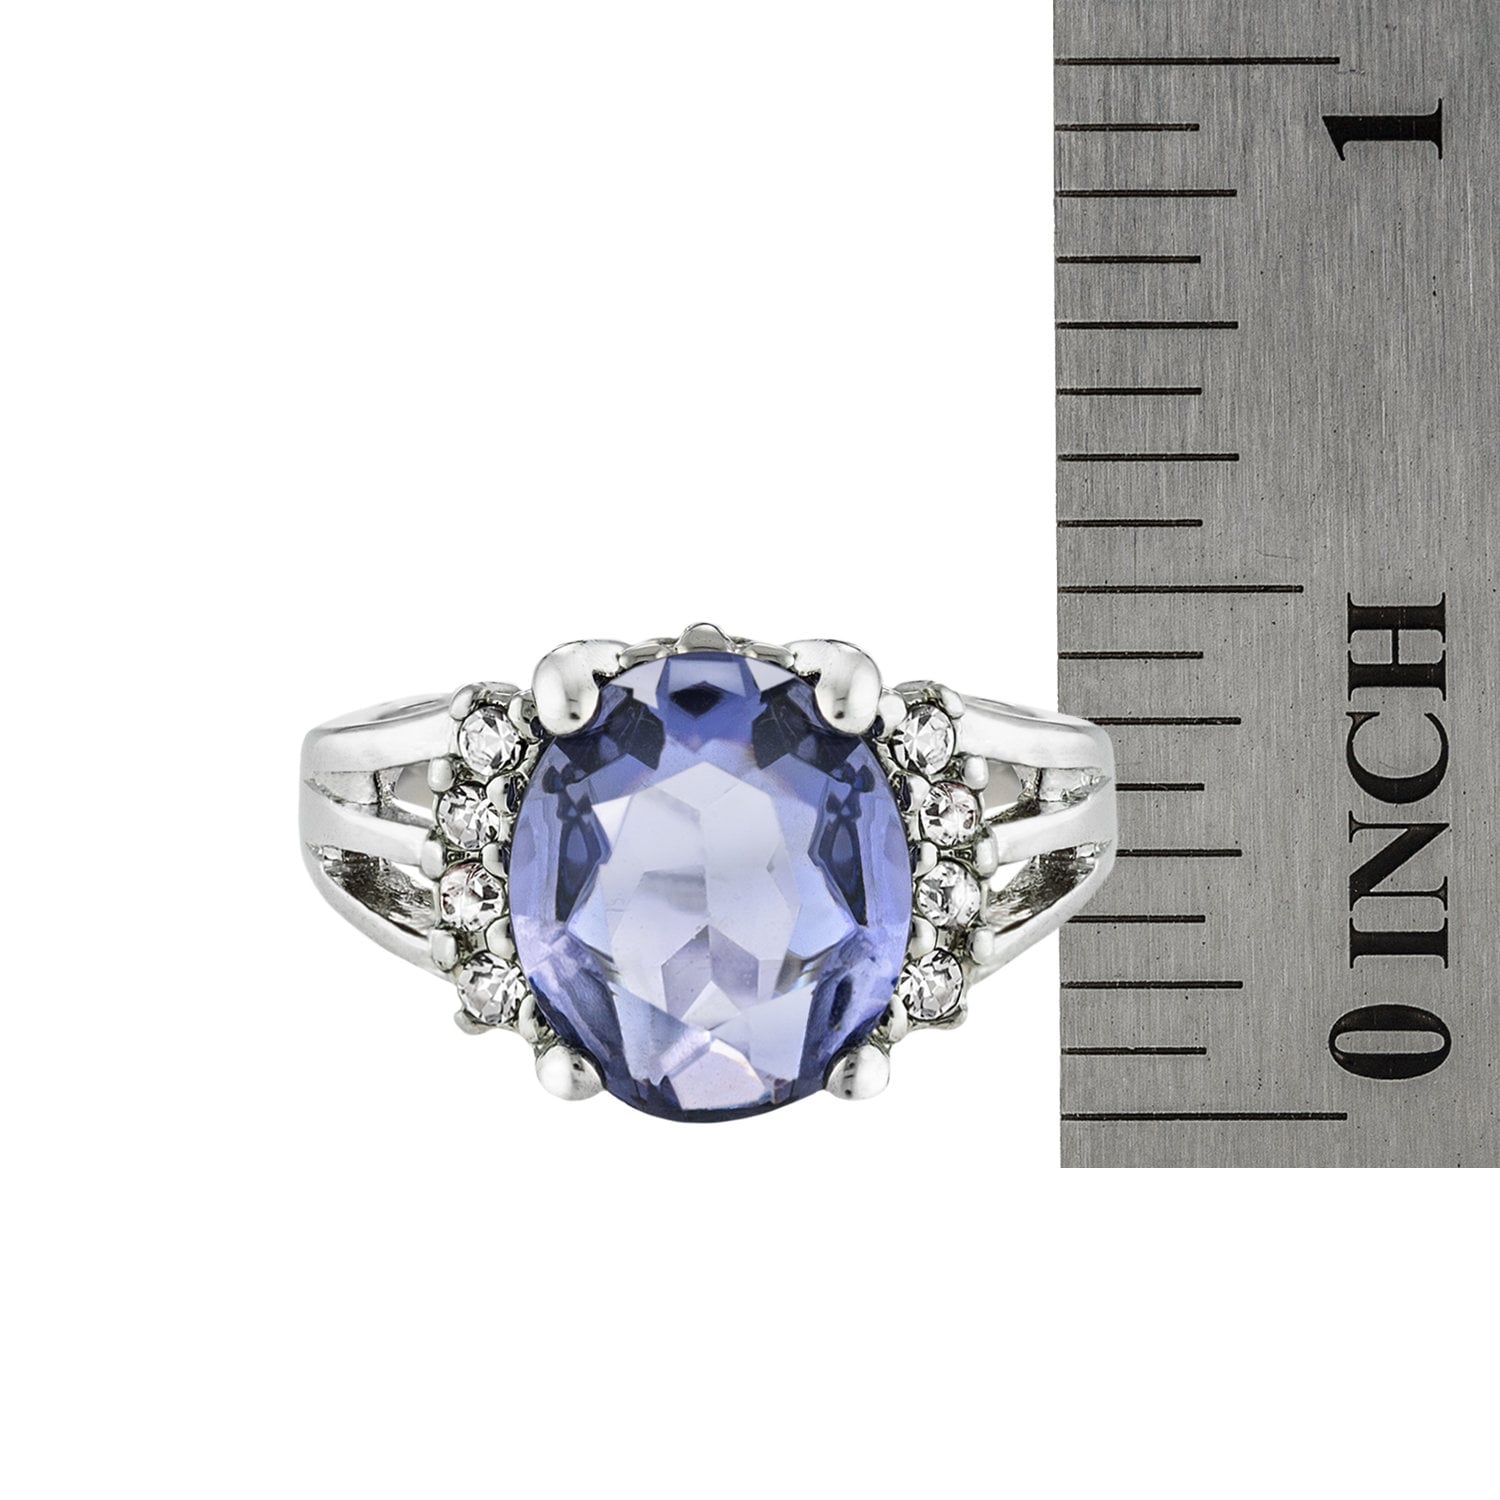 Vintage Ring 1980's Tanzanite Cubic Zirconia Ring with Clear Swarovski Crystals 18k White Gold Silver  R1664-AY - Limited Stock - Never Worn